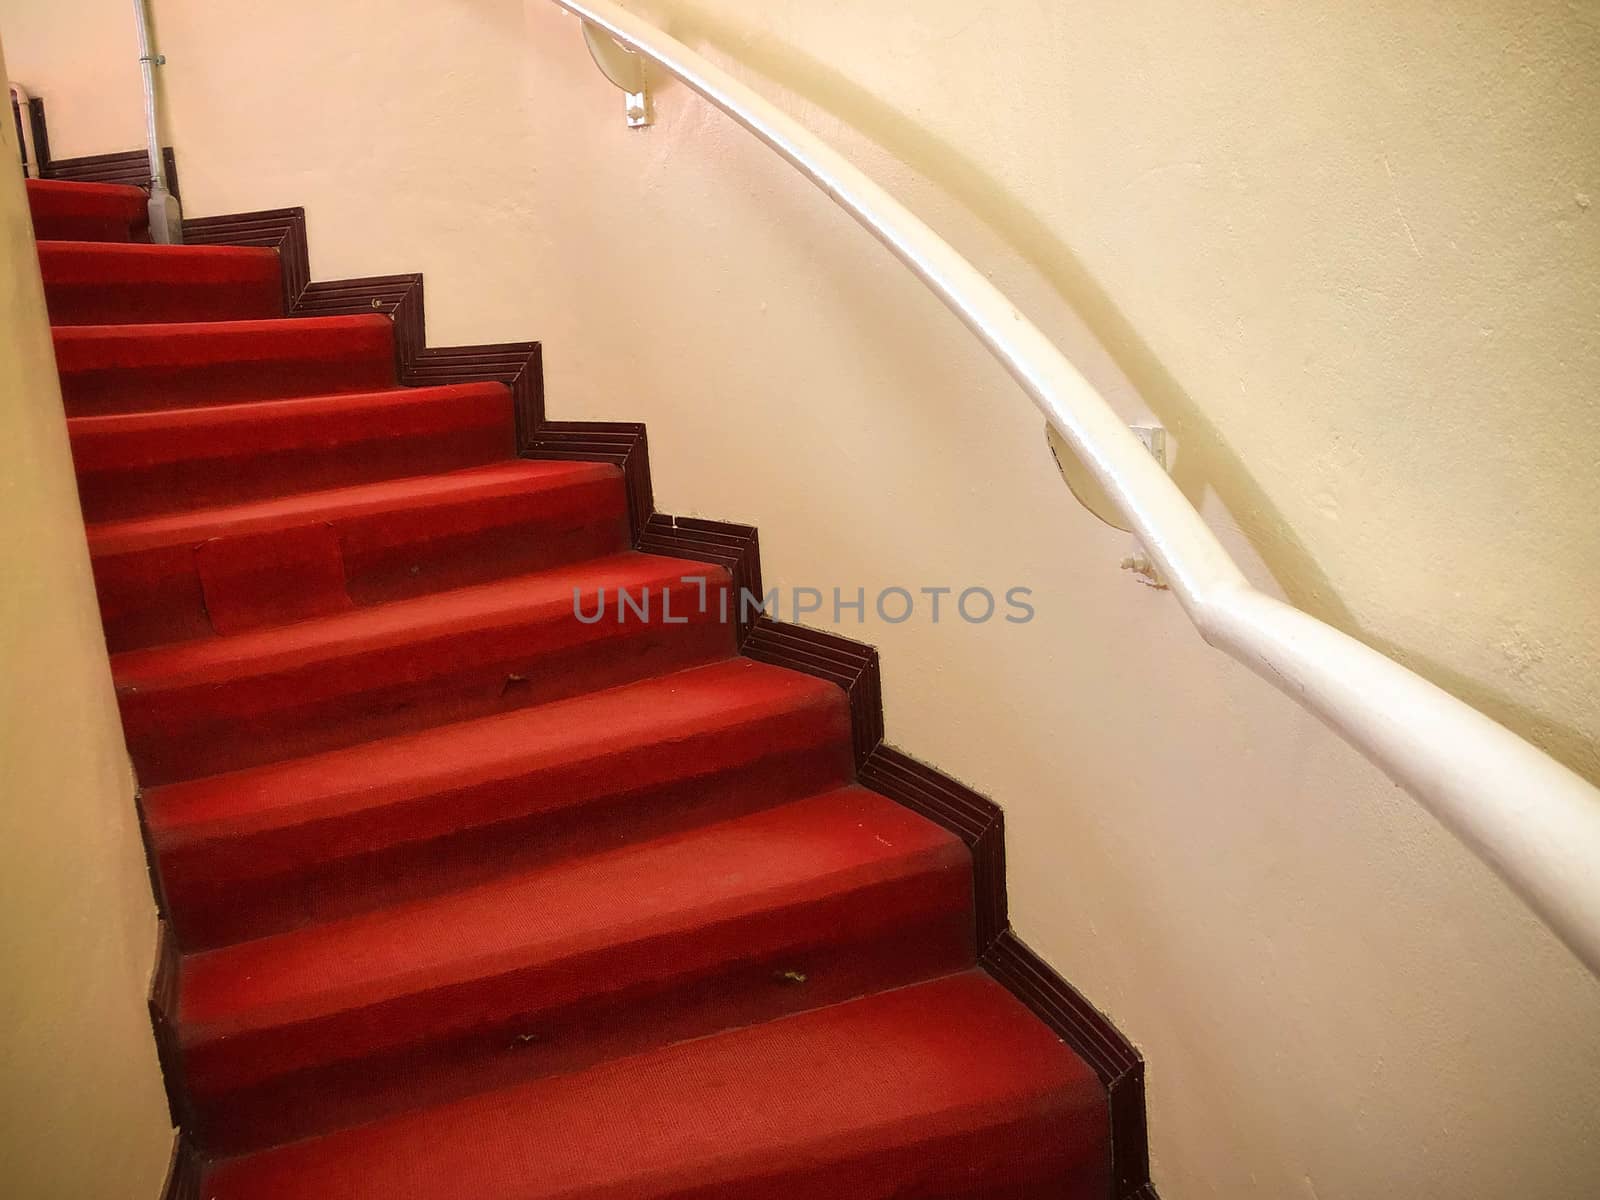 Red carpet on the White stairs in a interior by N_u_T